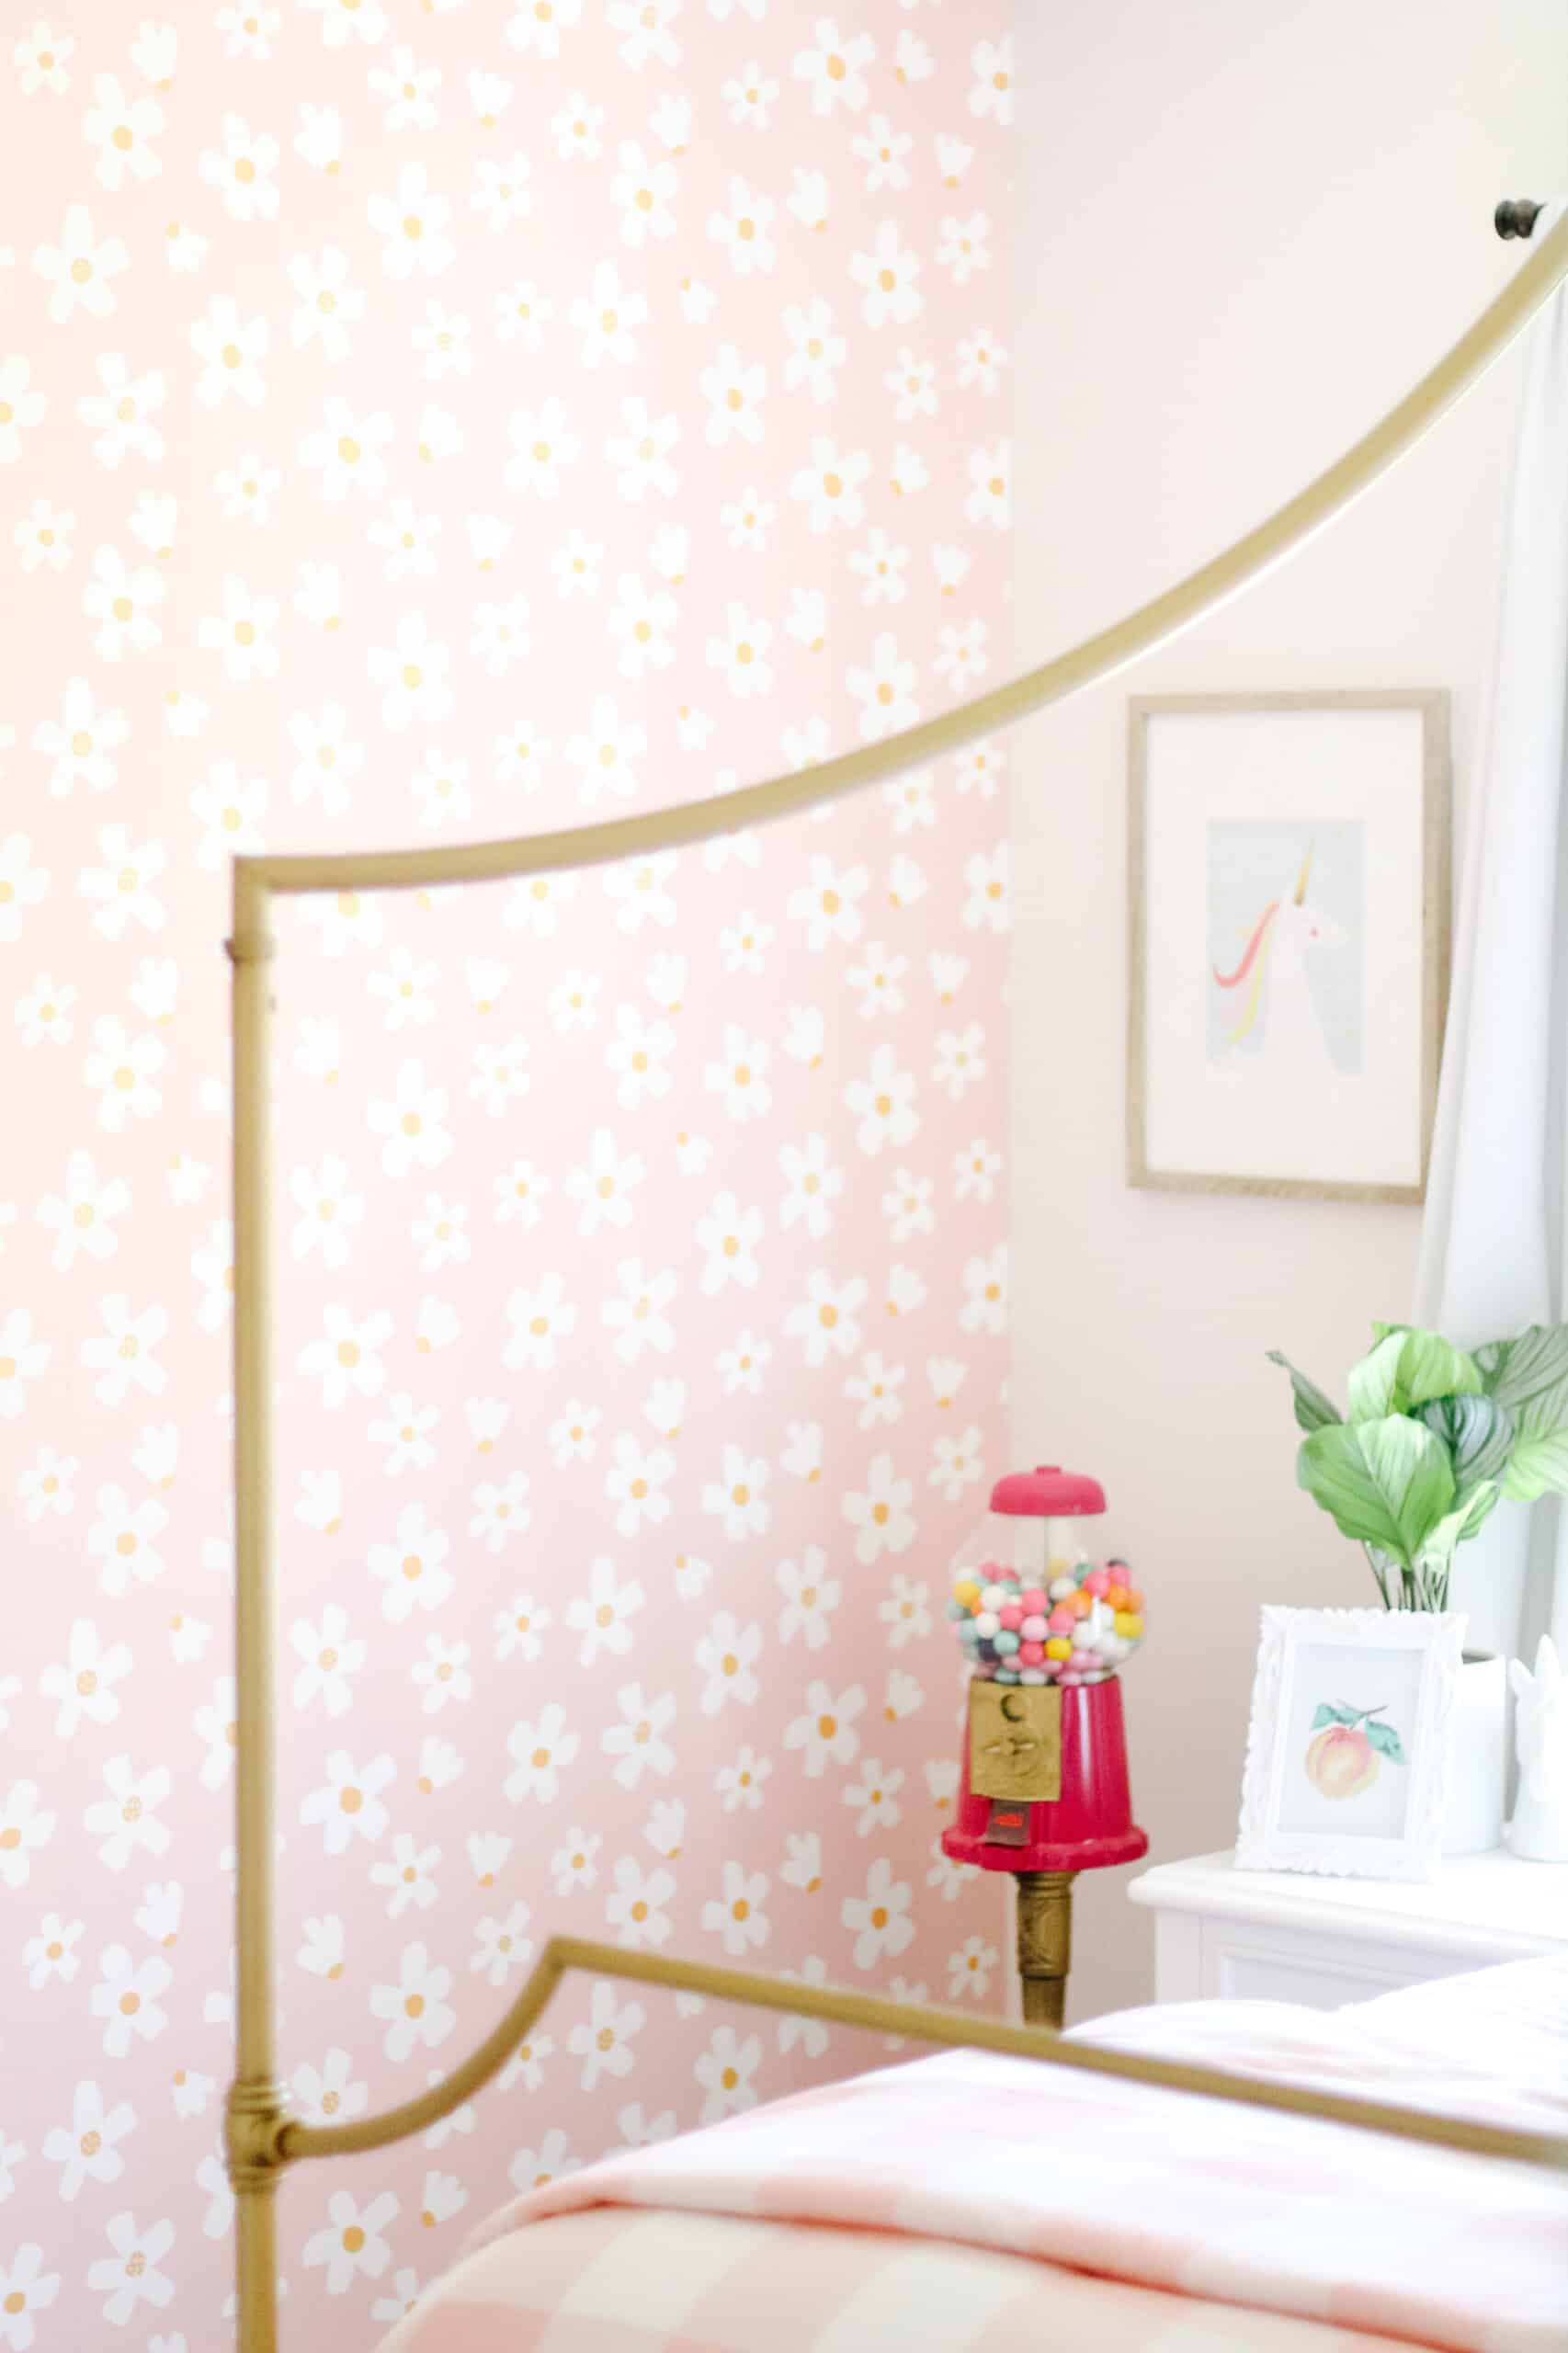 Daisy Wallpaper for a Girl's Room - arinsolangeathome